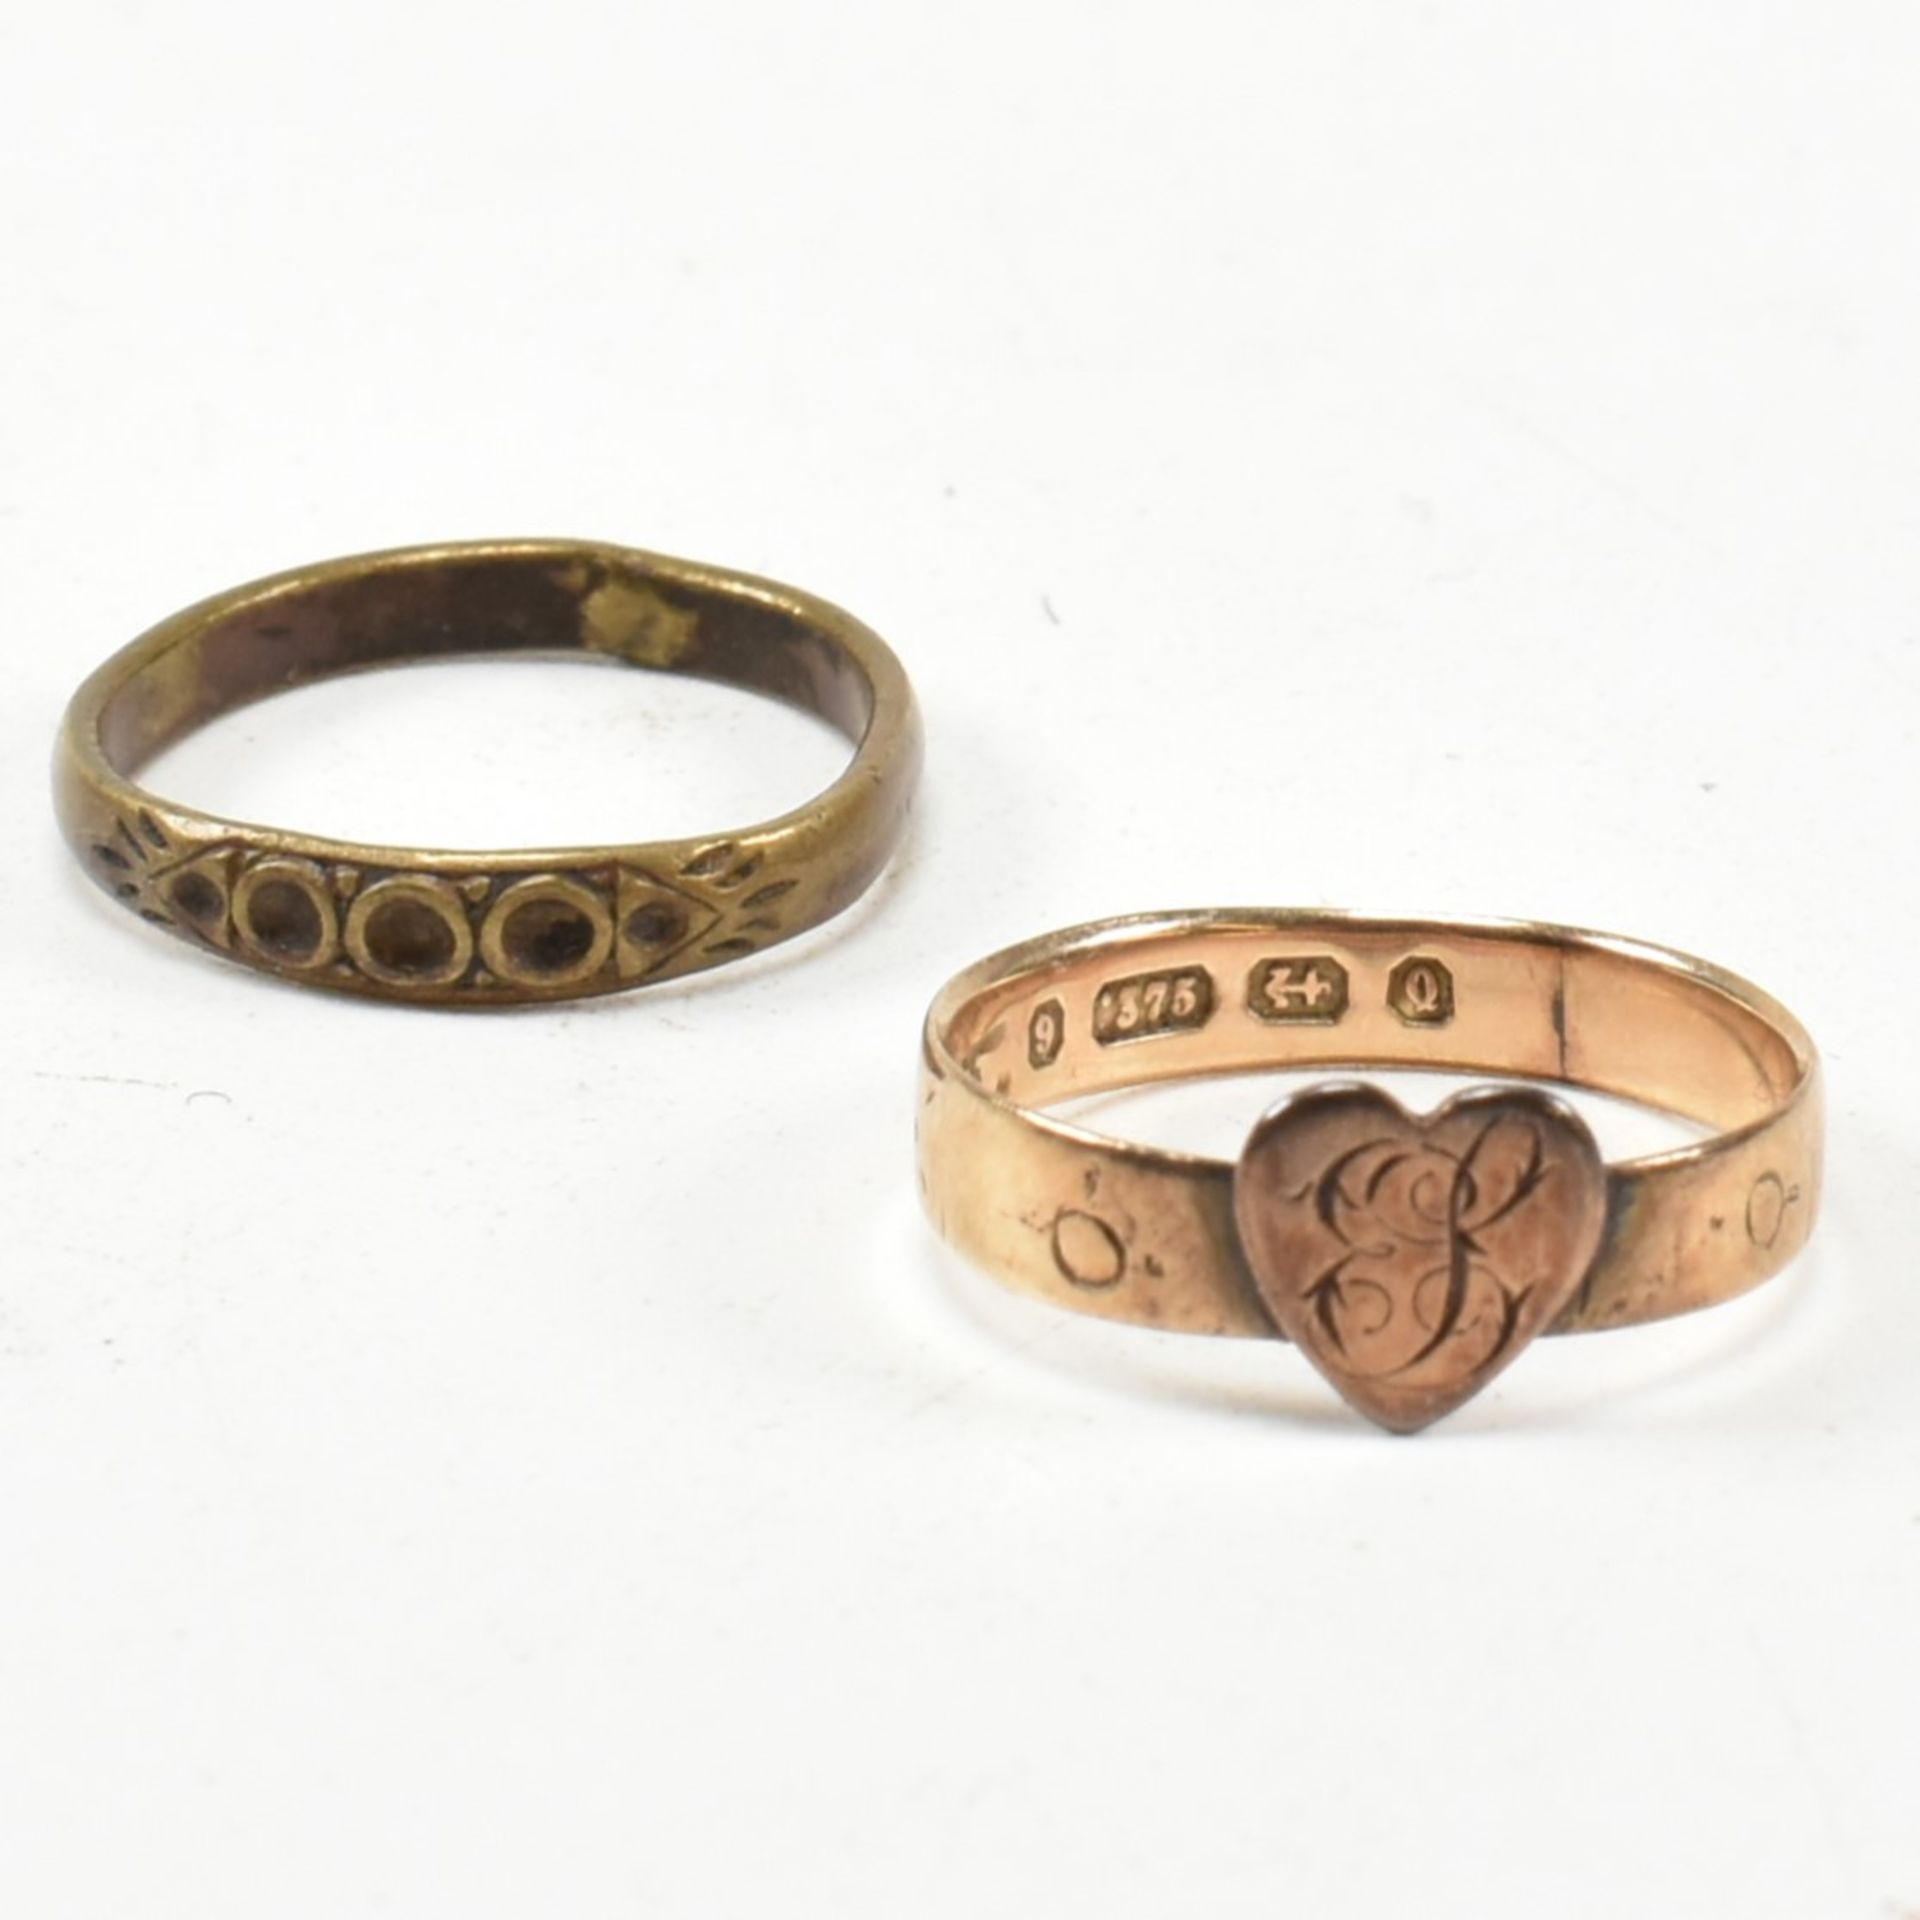 VICTORIAN HALLMARKED 9CT GOLD HEART SIGNET RING & GOLD TONE METAL RING